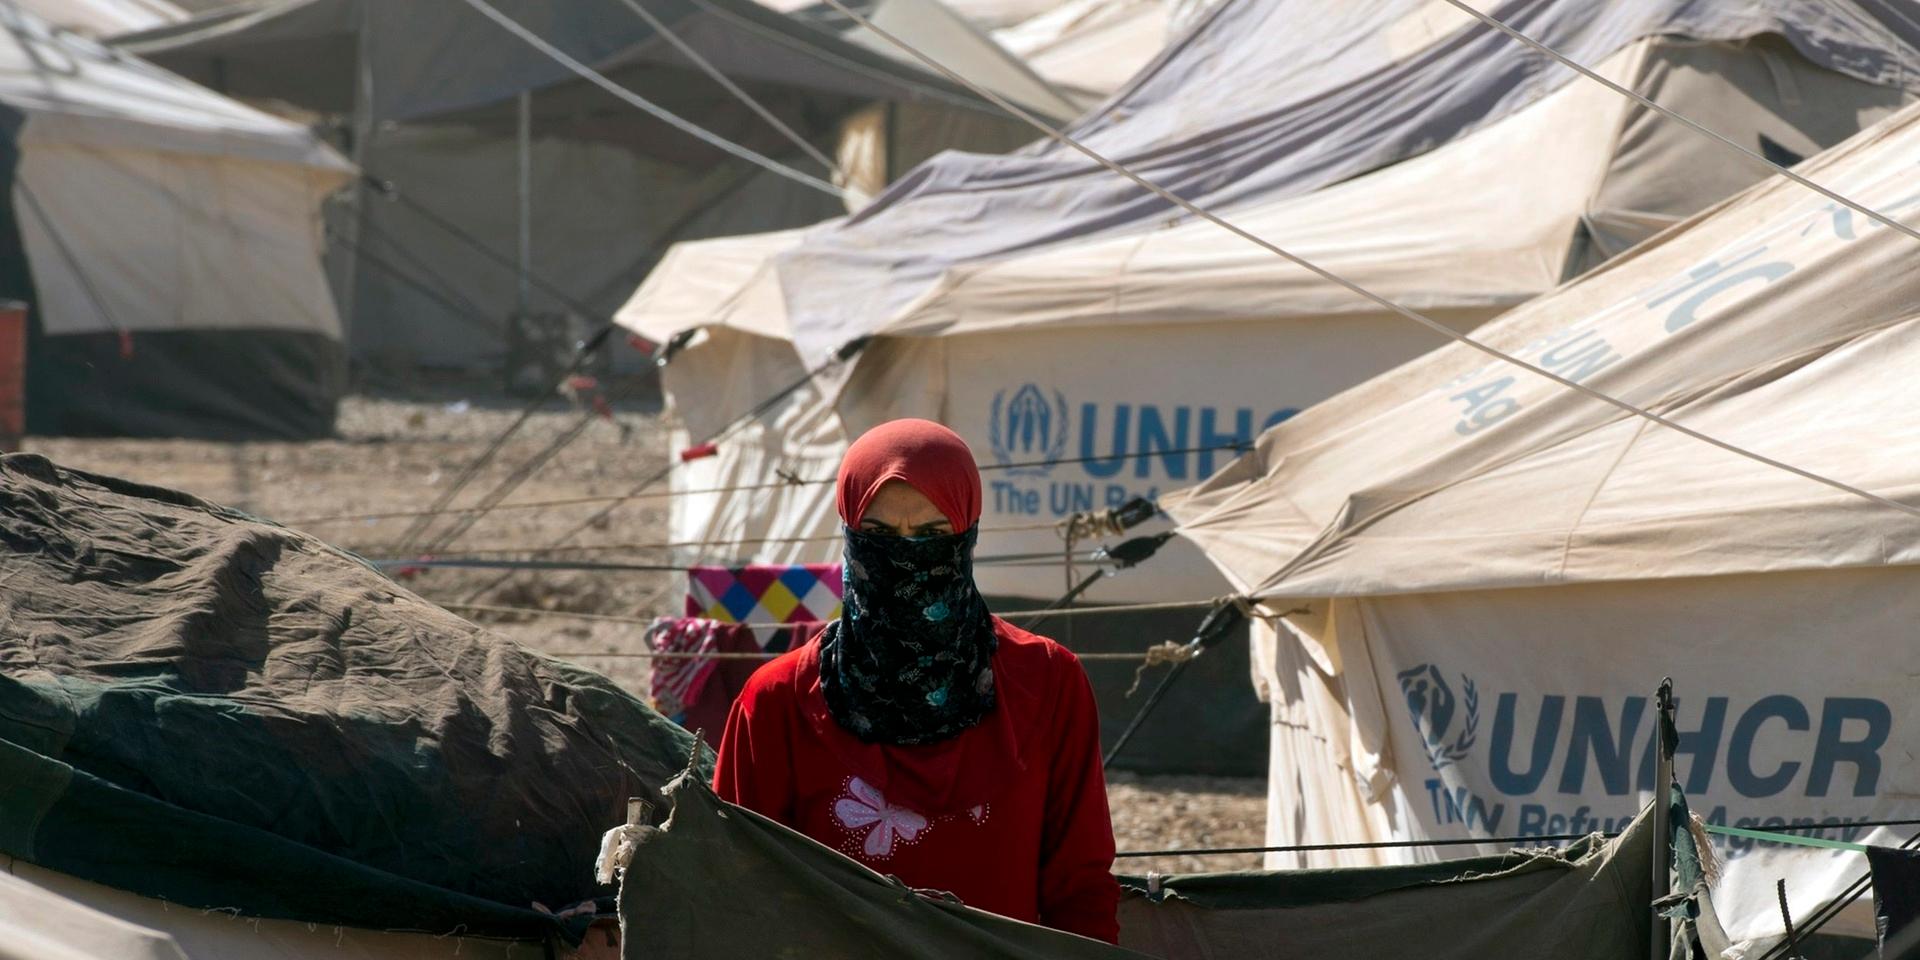 A woman looks out from her tent at an internally displaced persons camp in Irbil, Iraq on Thursday, Sept. 4, 2014. The UNHCR-sponsored camp was originally built for Syrian refugees, but re-opened for those fleeing Mosul. Over 600 families live here. In June 2014, the Islamic State group spearheaded an offensive, seizing vast swaths of northern Iraq, including the country's second largest city, Mosul. (AP Photo/The Canadian Press, Ryan Remiorz) / TT / kod 436